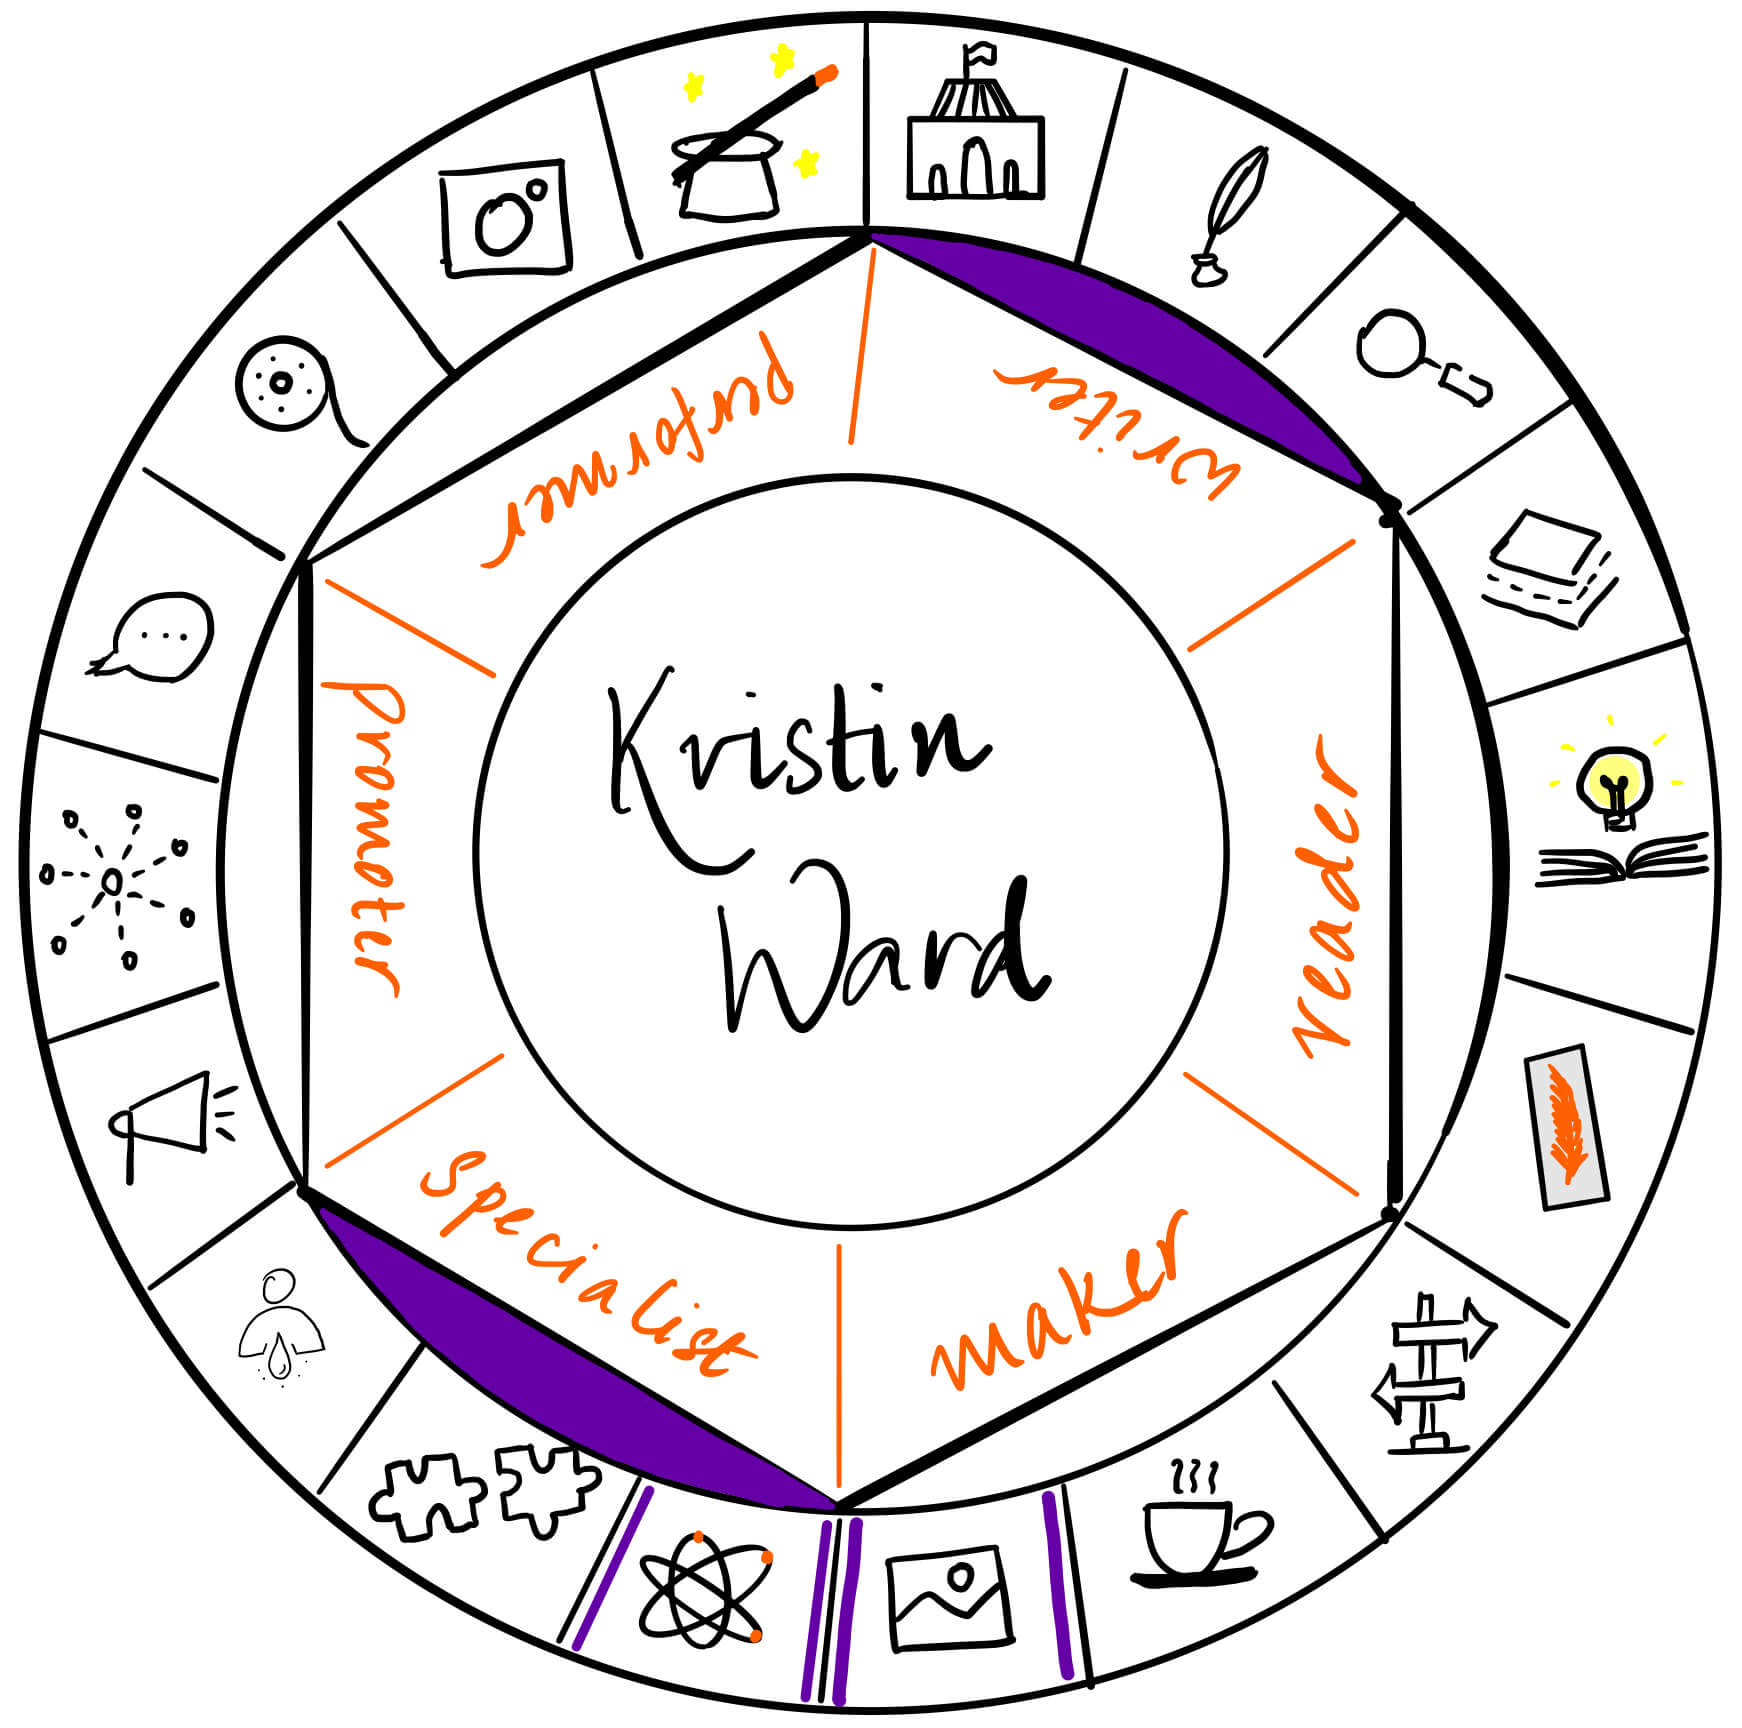 Kristin Ward is a writer and specialist. It's a pleasure to have her over on The Creator's Roulette to talk about reseraching and writing environmental issues in fiction.